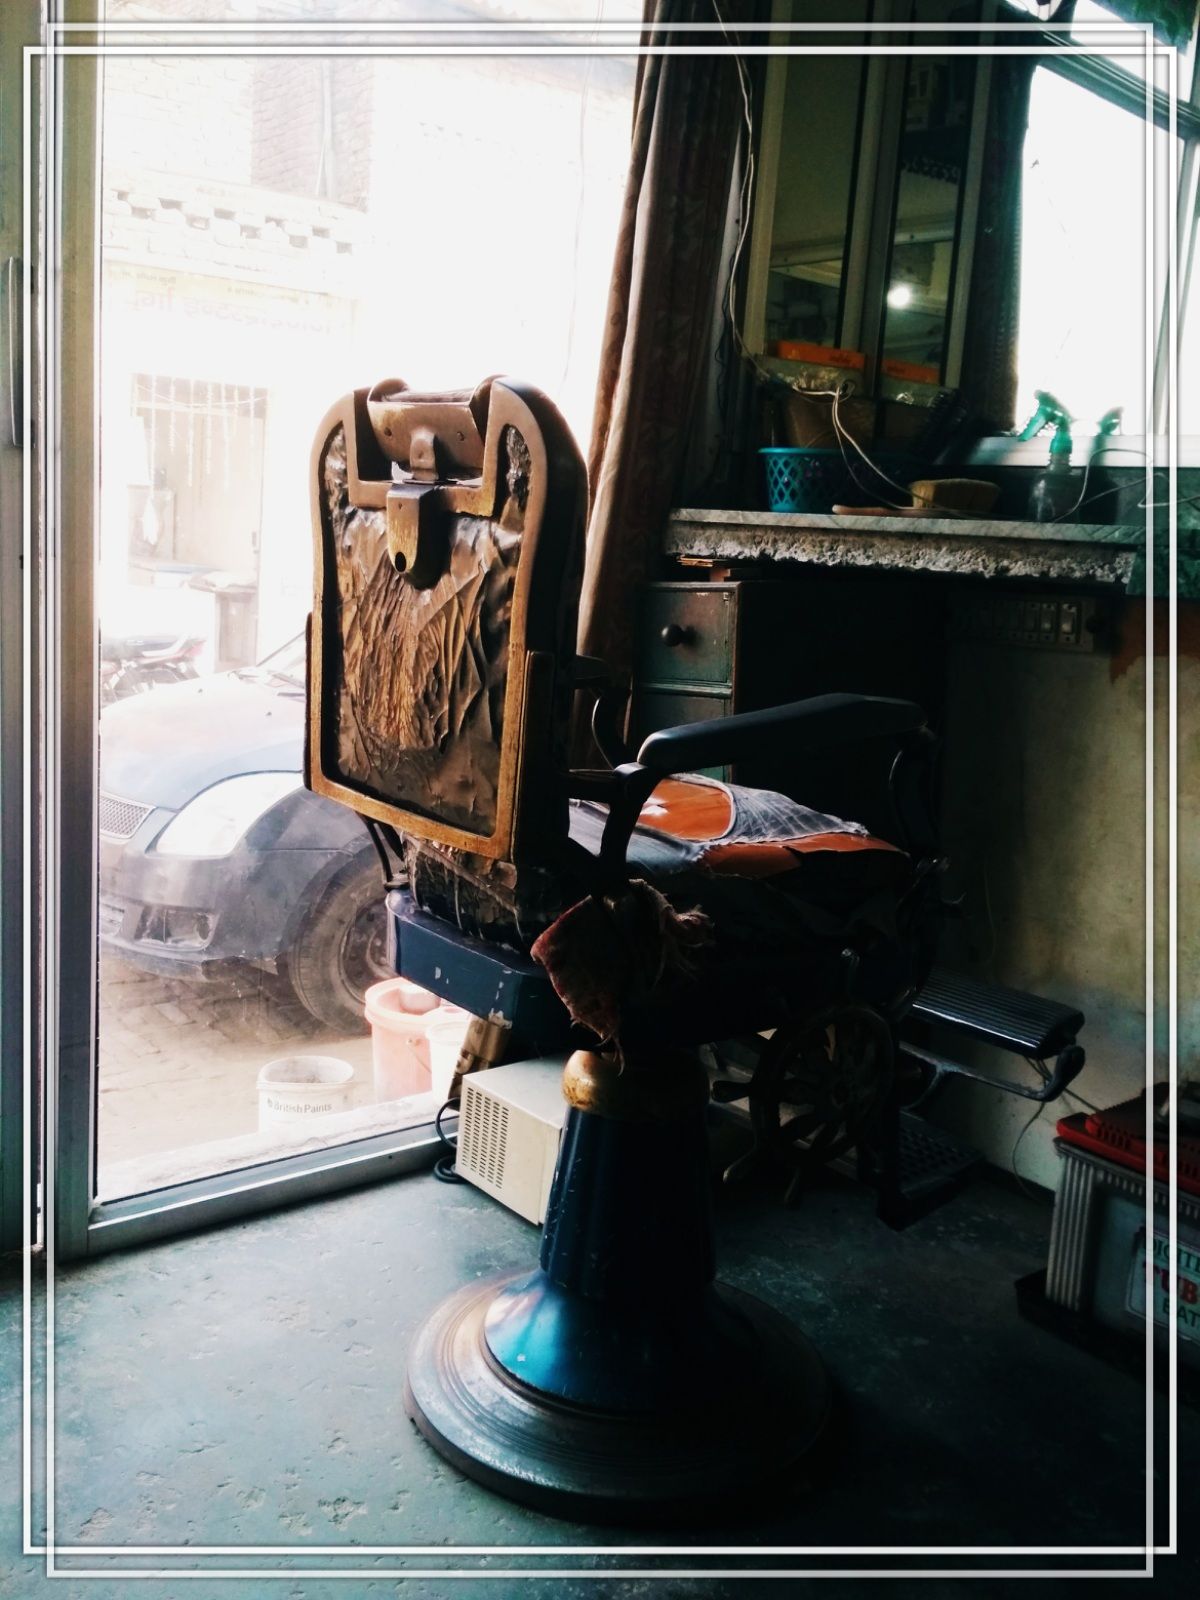 An old chair in barber shop.